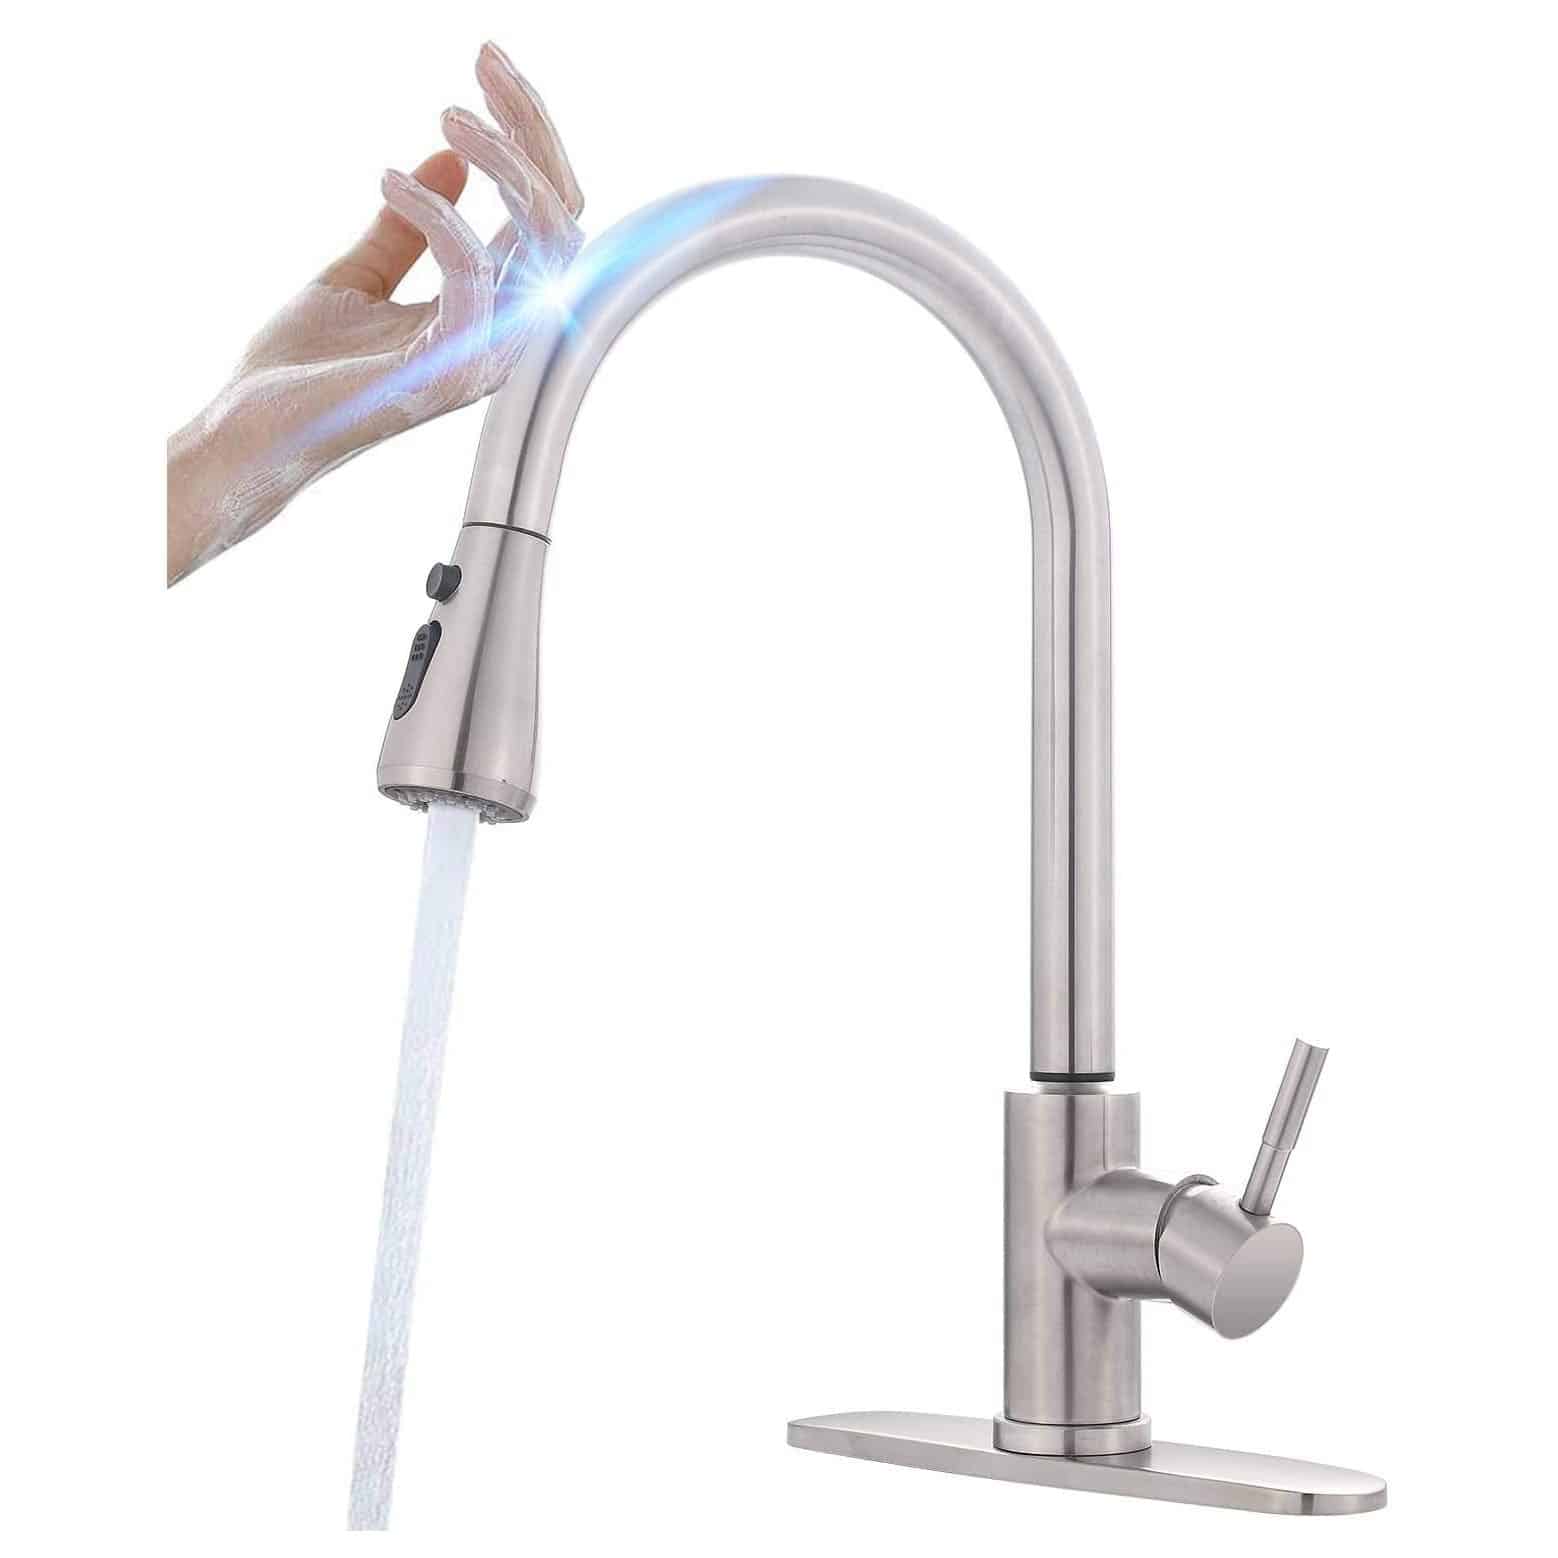 4. MSTJRY Touch Kitchen Faucet With Pull Down Sprayer 